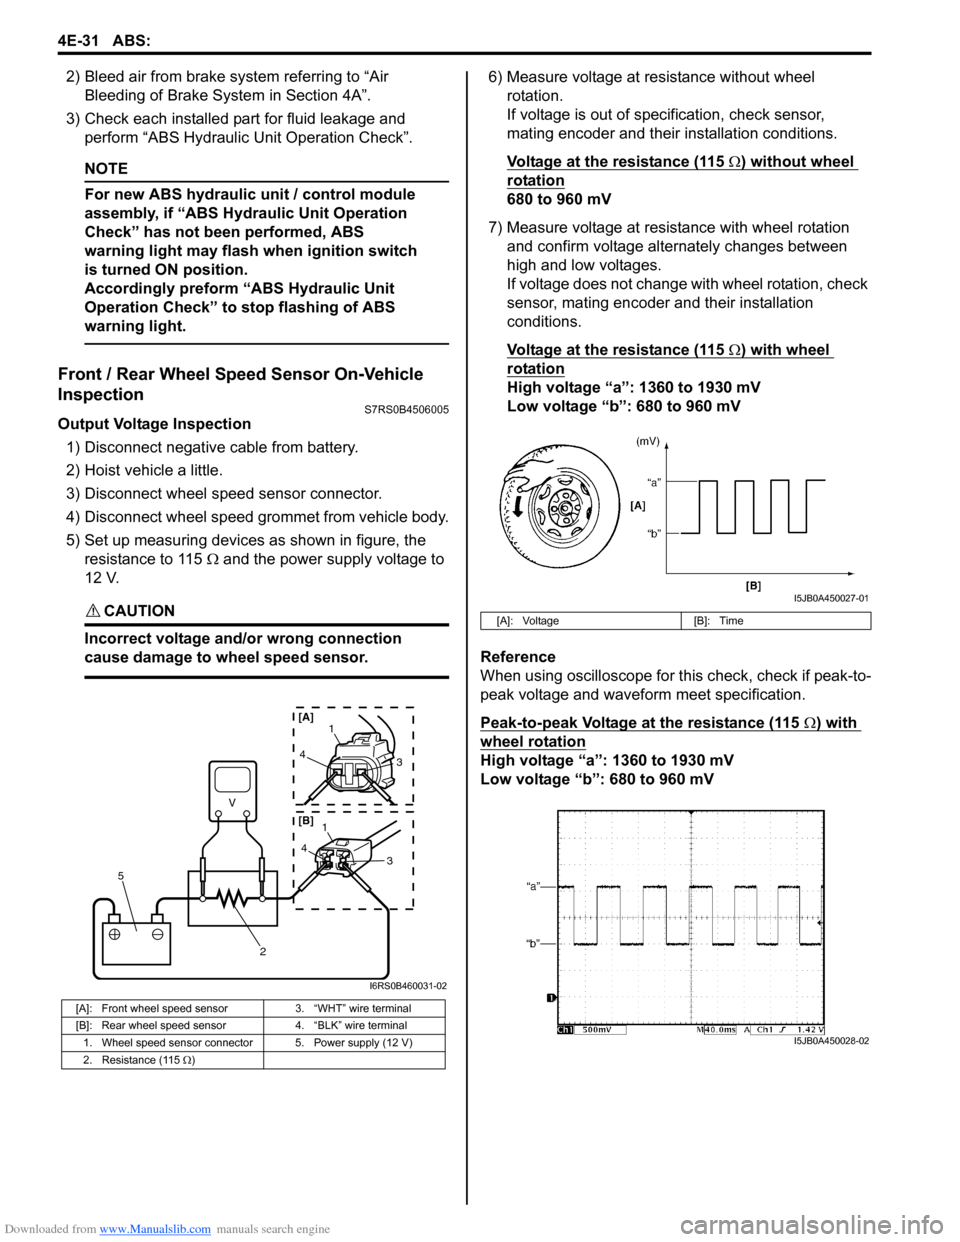 SUZUKI SWIFT 2005 2.G Service Workshop Manual Downloaded from www.Manualslib.com manuals search engine 4E-31 ABS: 
2) Bleed air from brake system referring to “Air Bleeding of Brake System in Section 4A”.
3) Check each installed part for flui